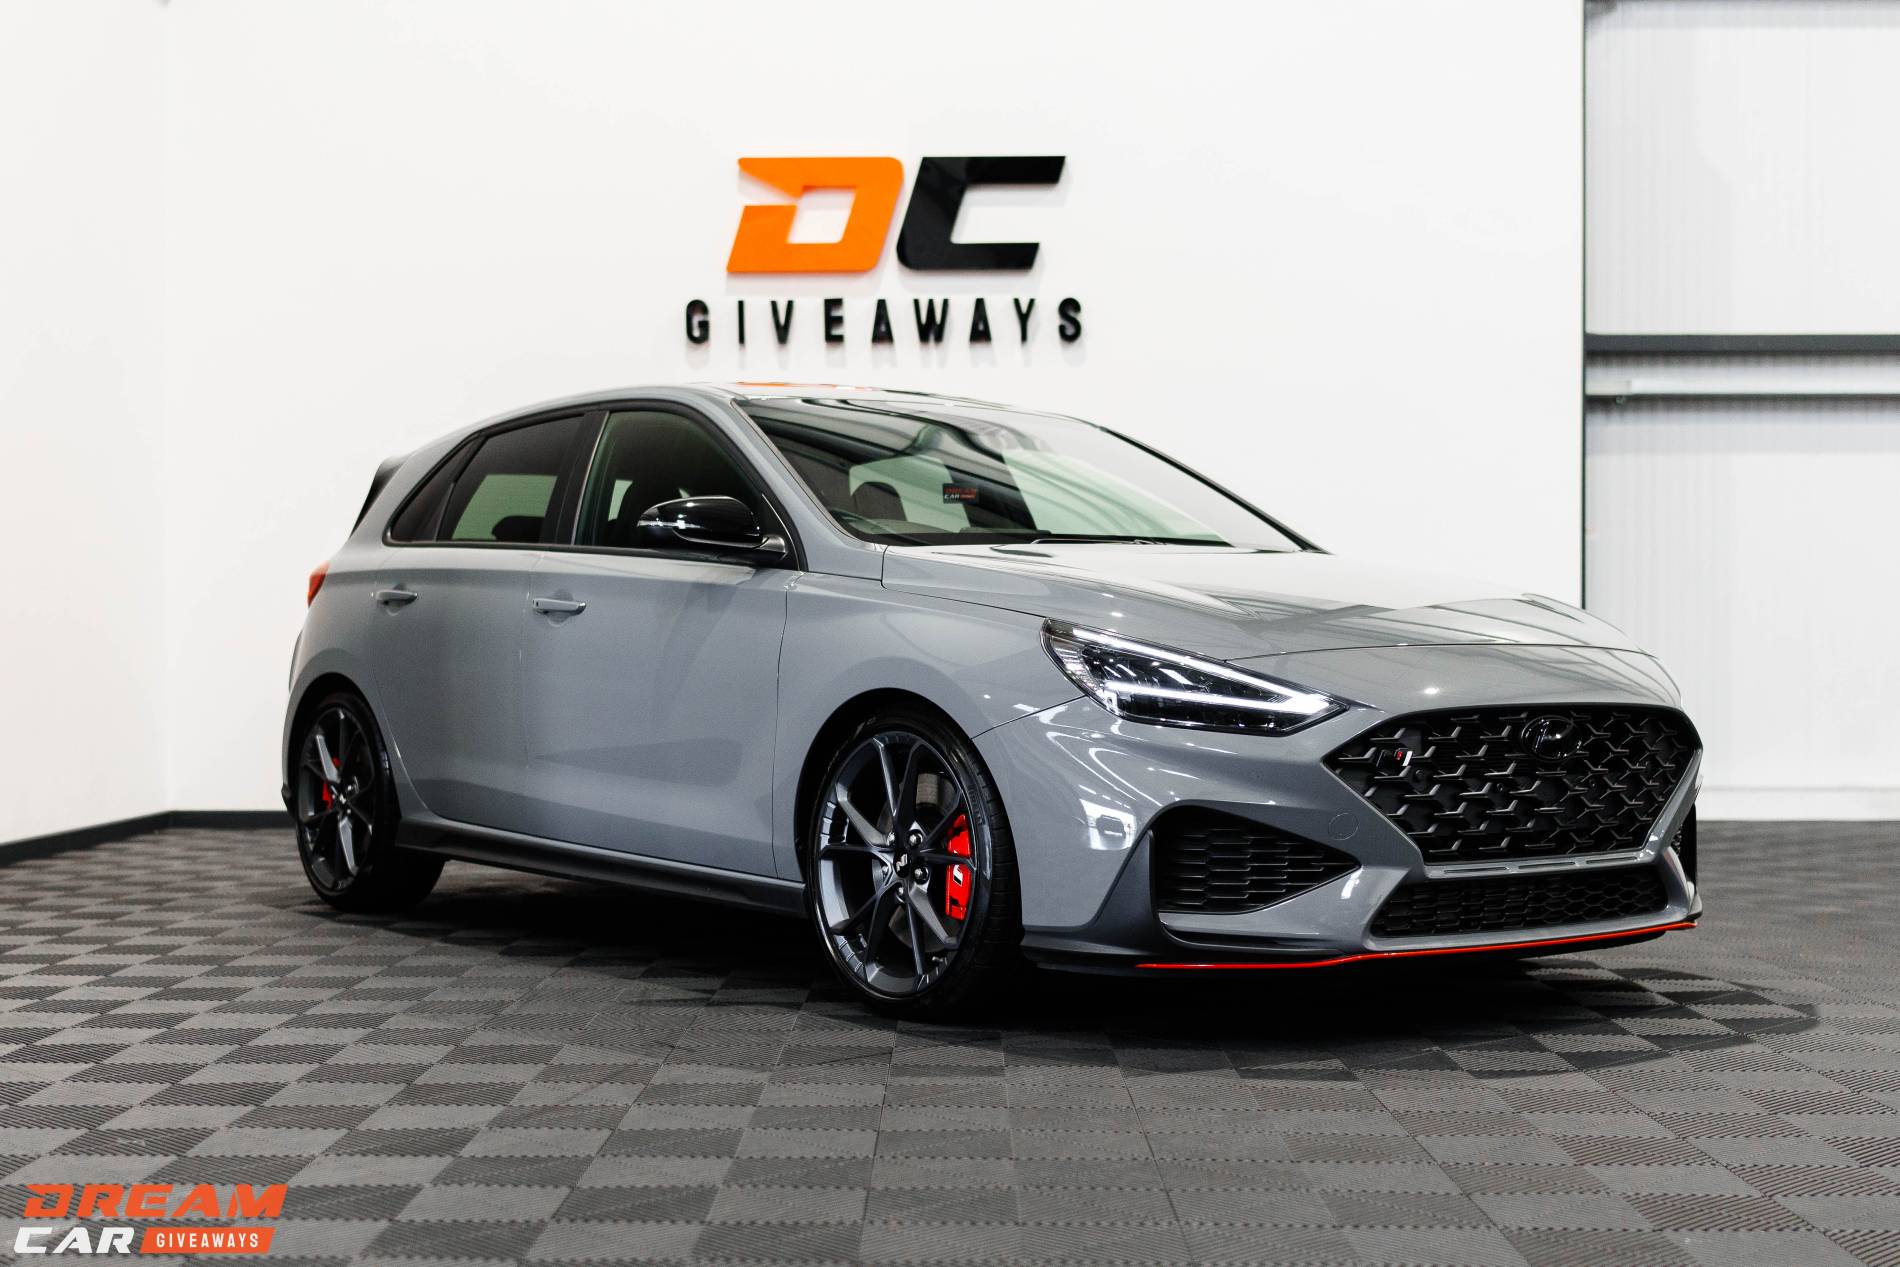 Win this 2023 Hyundai I30n Performance - Only 949 Entries